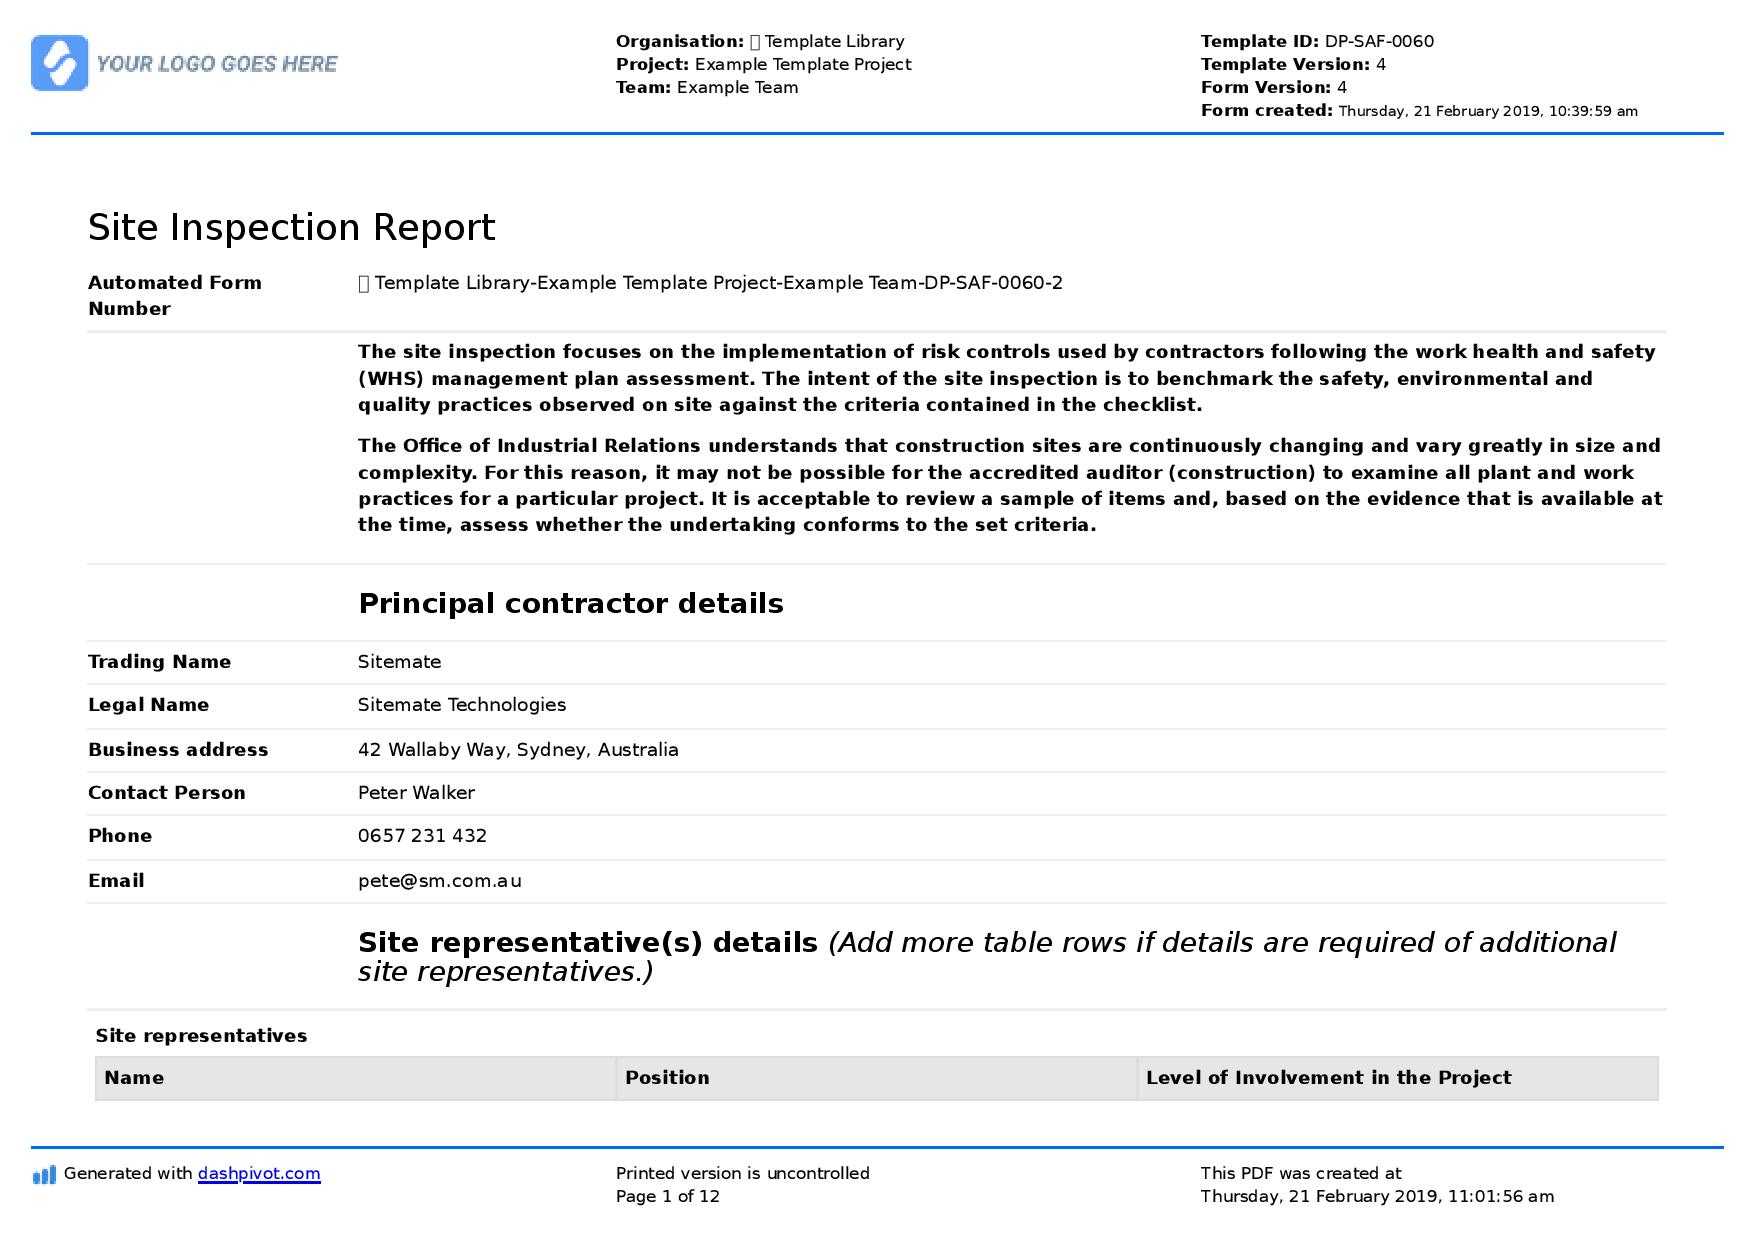 Site Inspection Report: Free Template, Sample And A Proven With Regard To Engineering Inspection Report Template